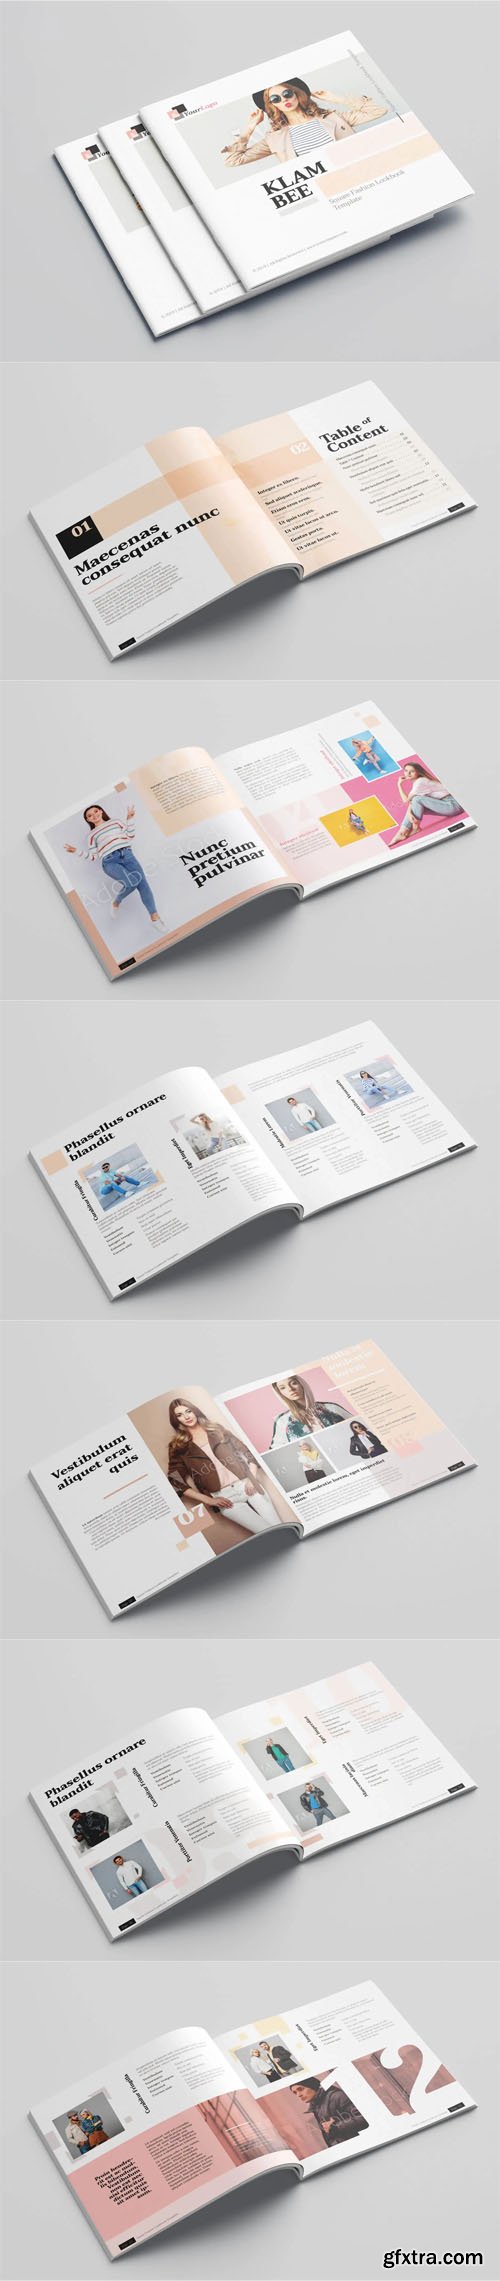 KLAMBEE - Square Fashion Lookbook INDD Template [24 Pages] [Re-Up]